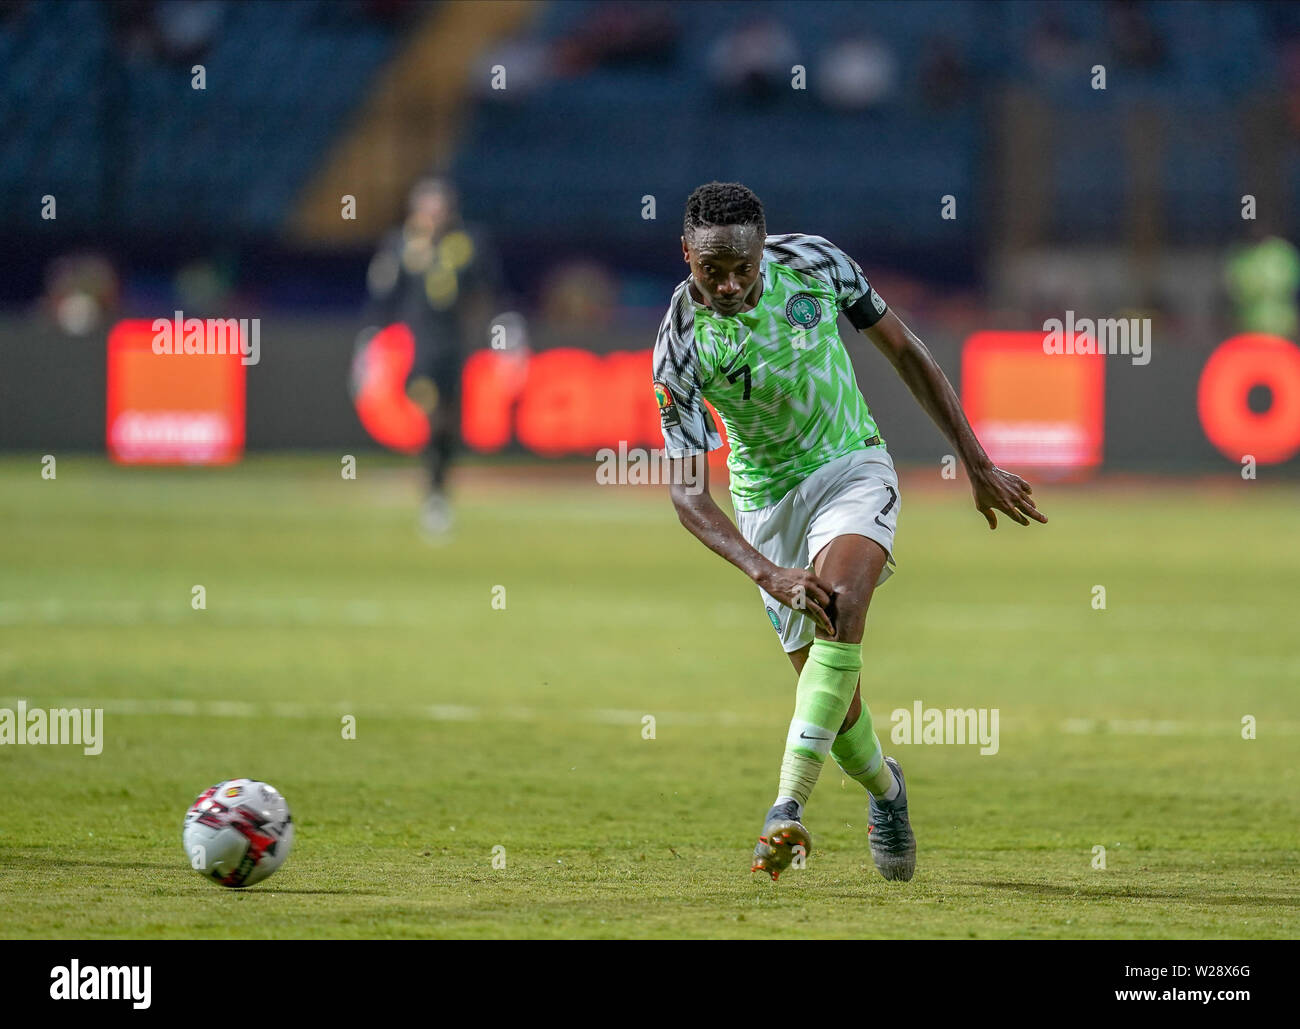 Alexandria, Egypt. 06th July, 2019. FRANCE OUT July 6, 2019: Ahmed Musa of Nigeria during the 2019 African Cup of Nations match between Cameroon and Nigeria at the Alexanddria Stadium in Alexandria, Egypt. Ulrik Pedersen/CSM/Alamy Live News Stock Photo